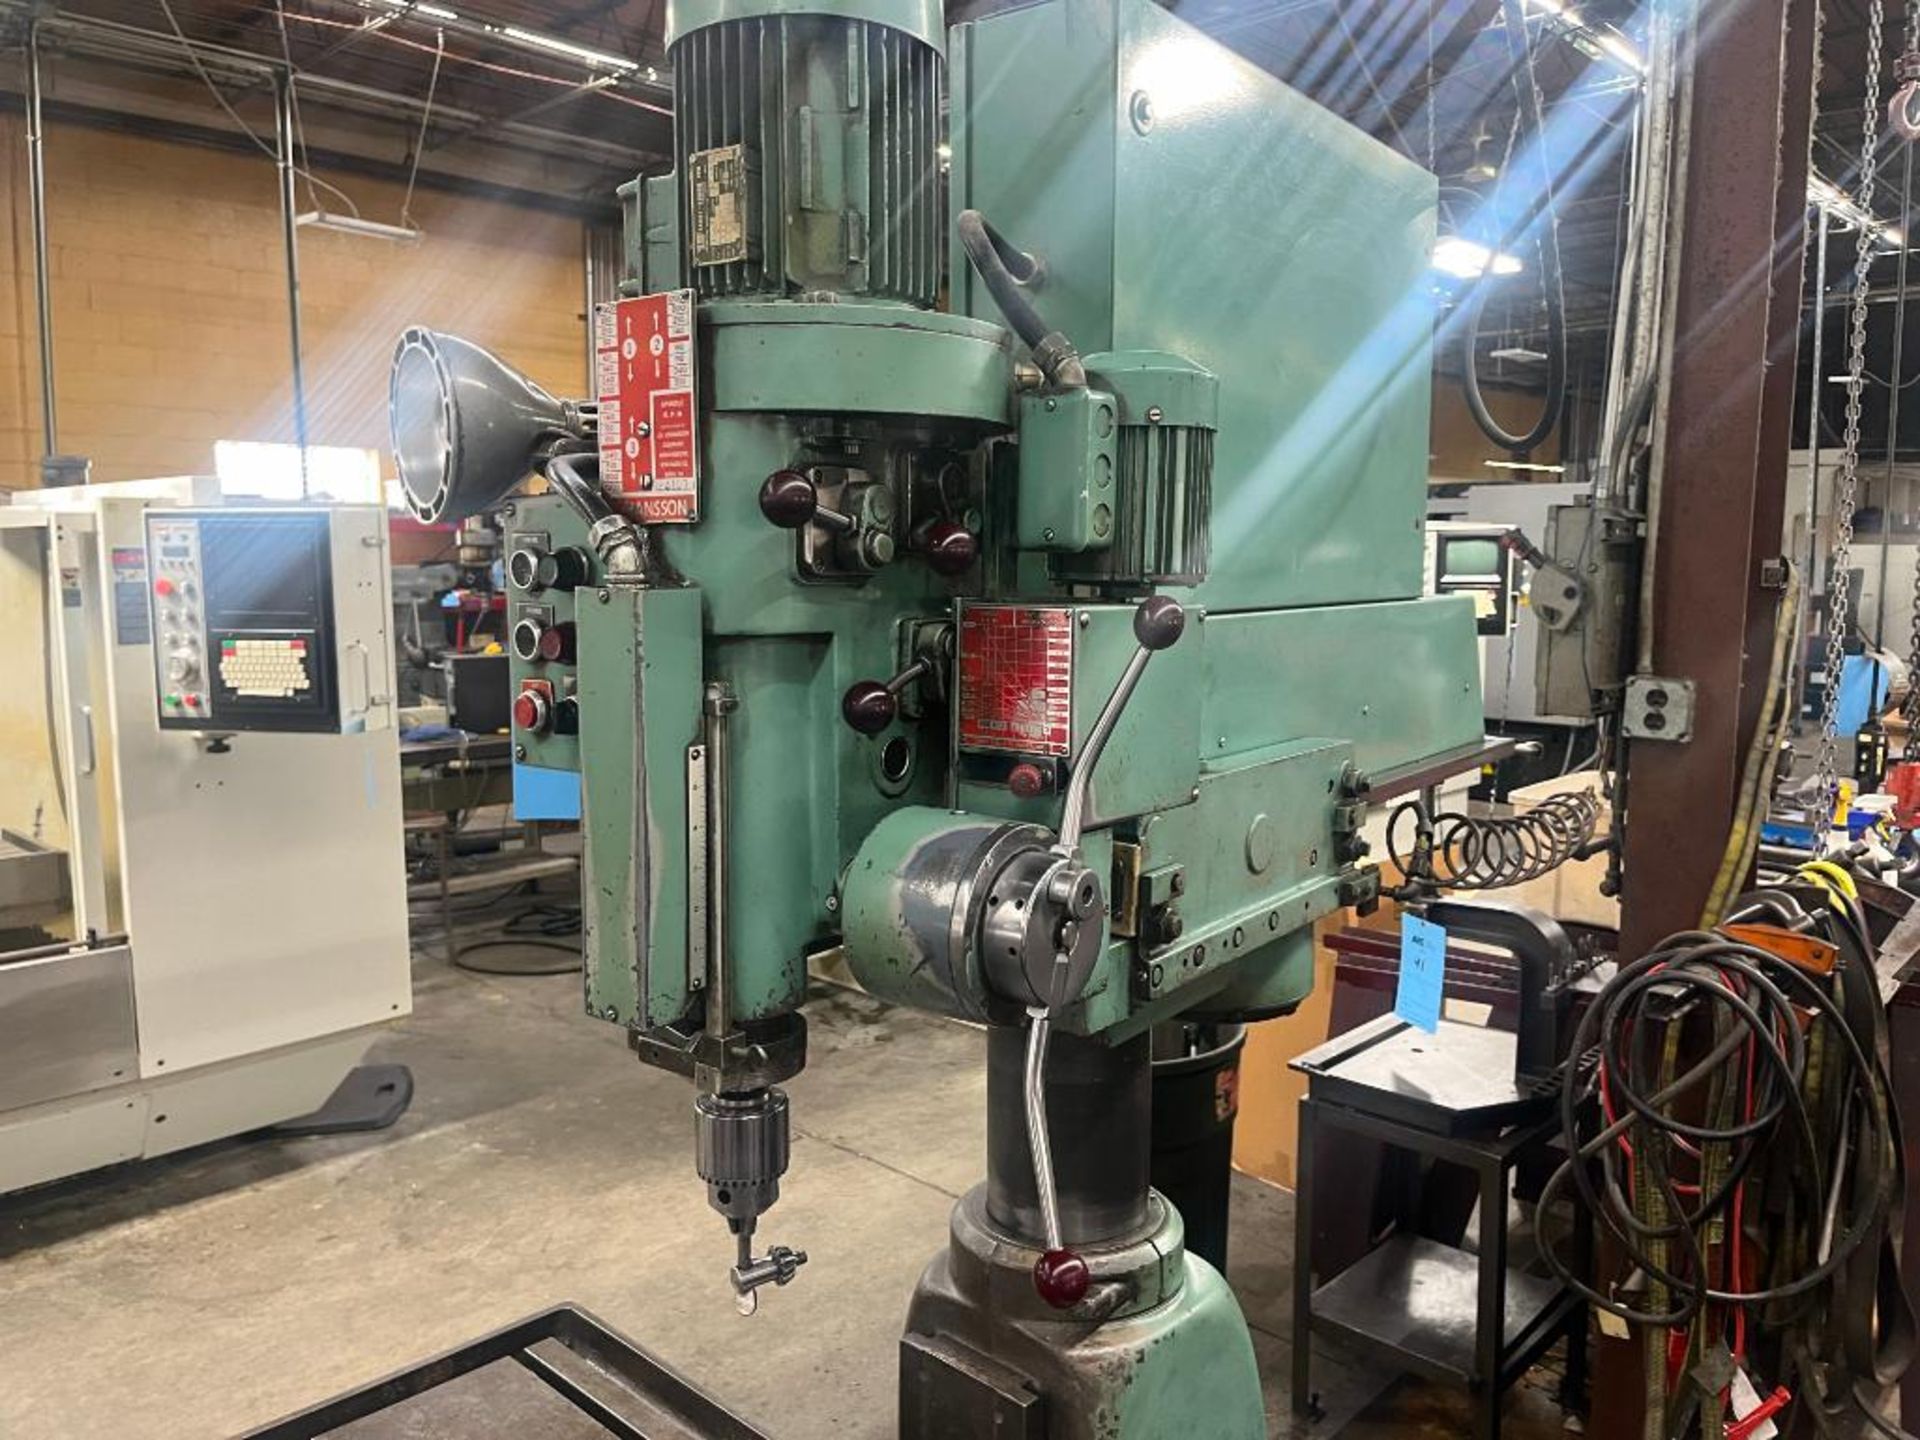 Johansson Radial Arm Drill with Push Button Controls, S/N 23107 - Image 5 of 15